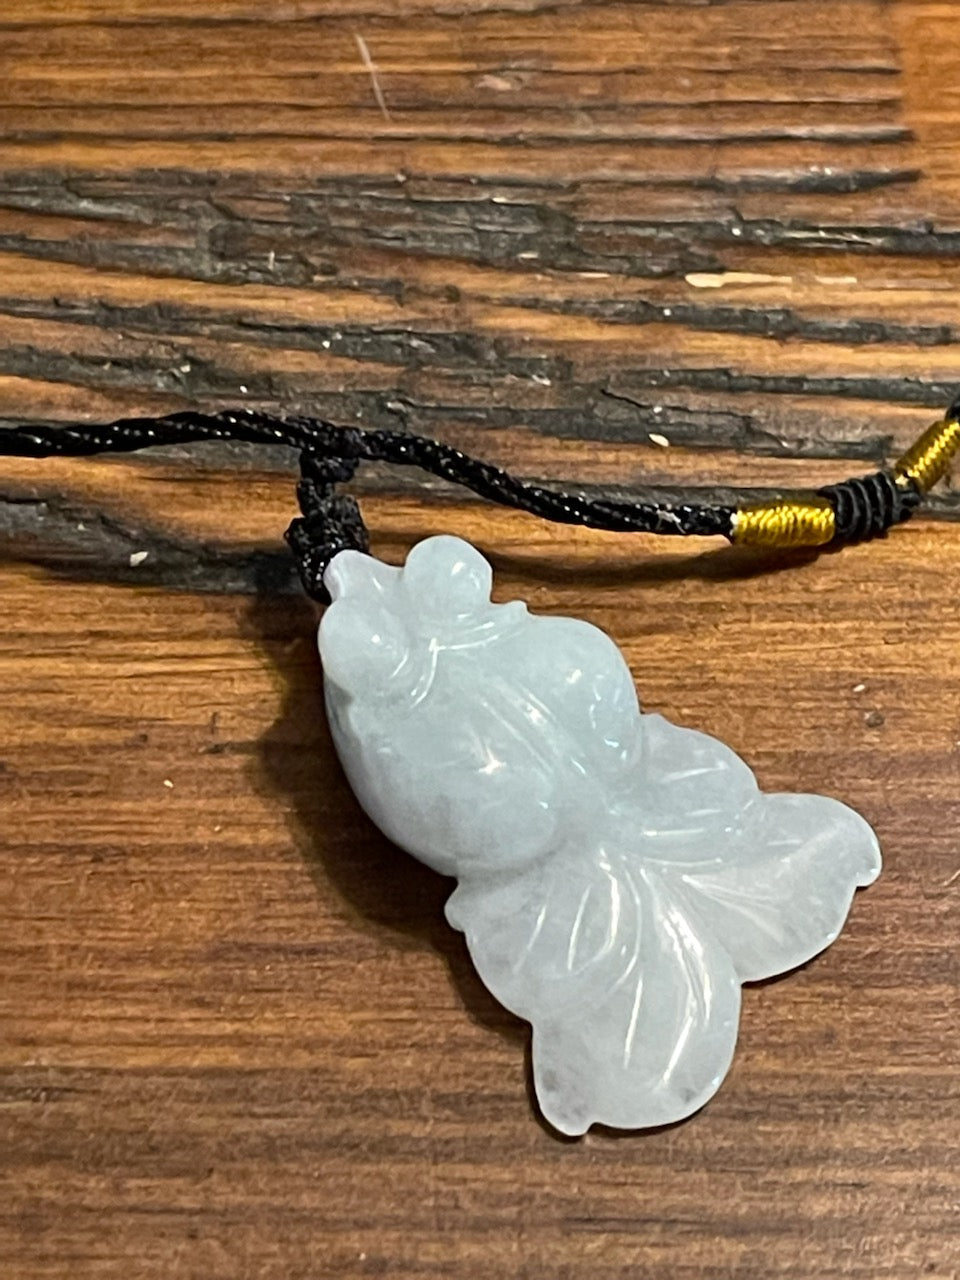 Asian Jade Fish For Luck & Wealth